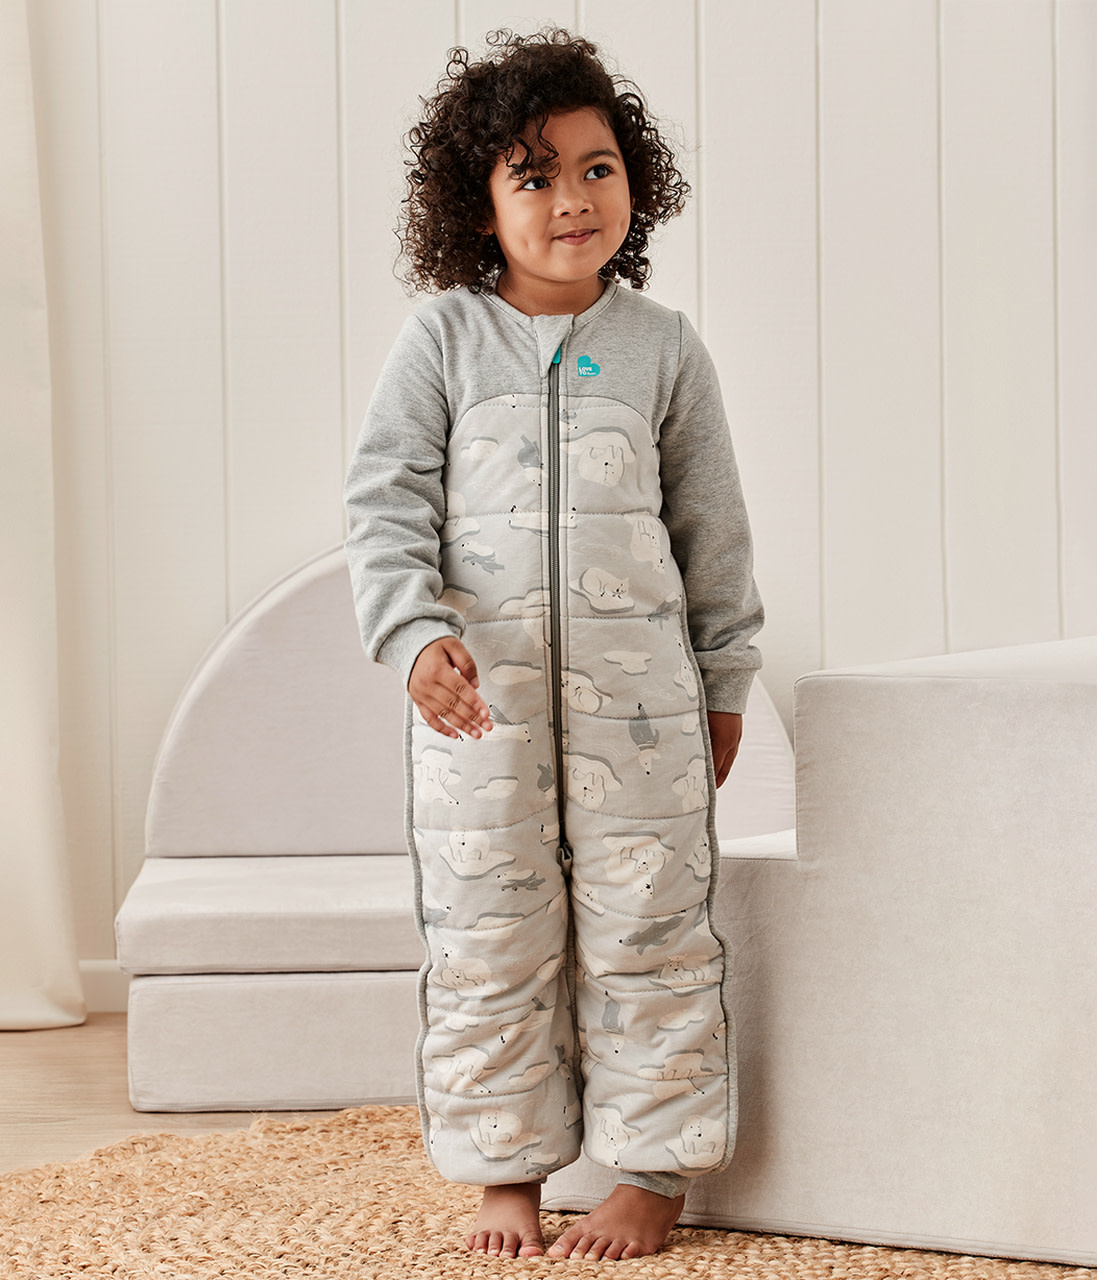 Love To Dream Love To Dream Sleepsuit - Extra Warm 3.5 Tog Grey - South Pole